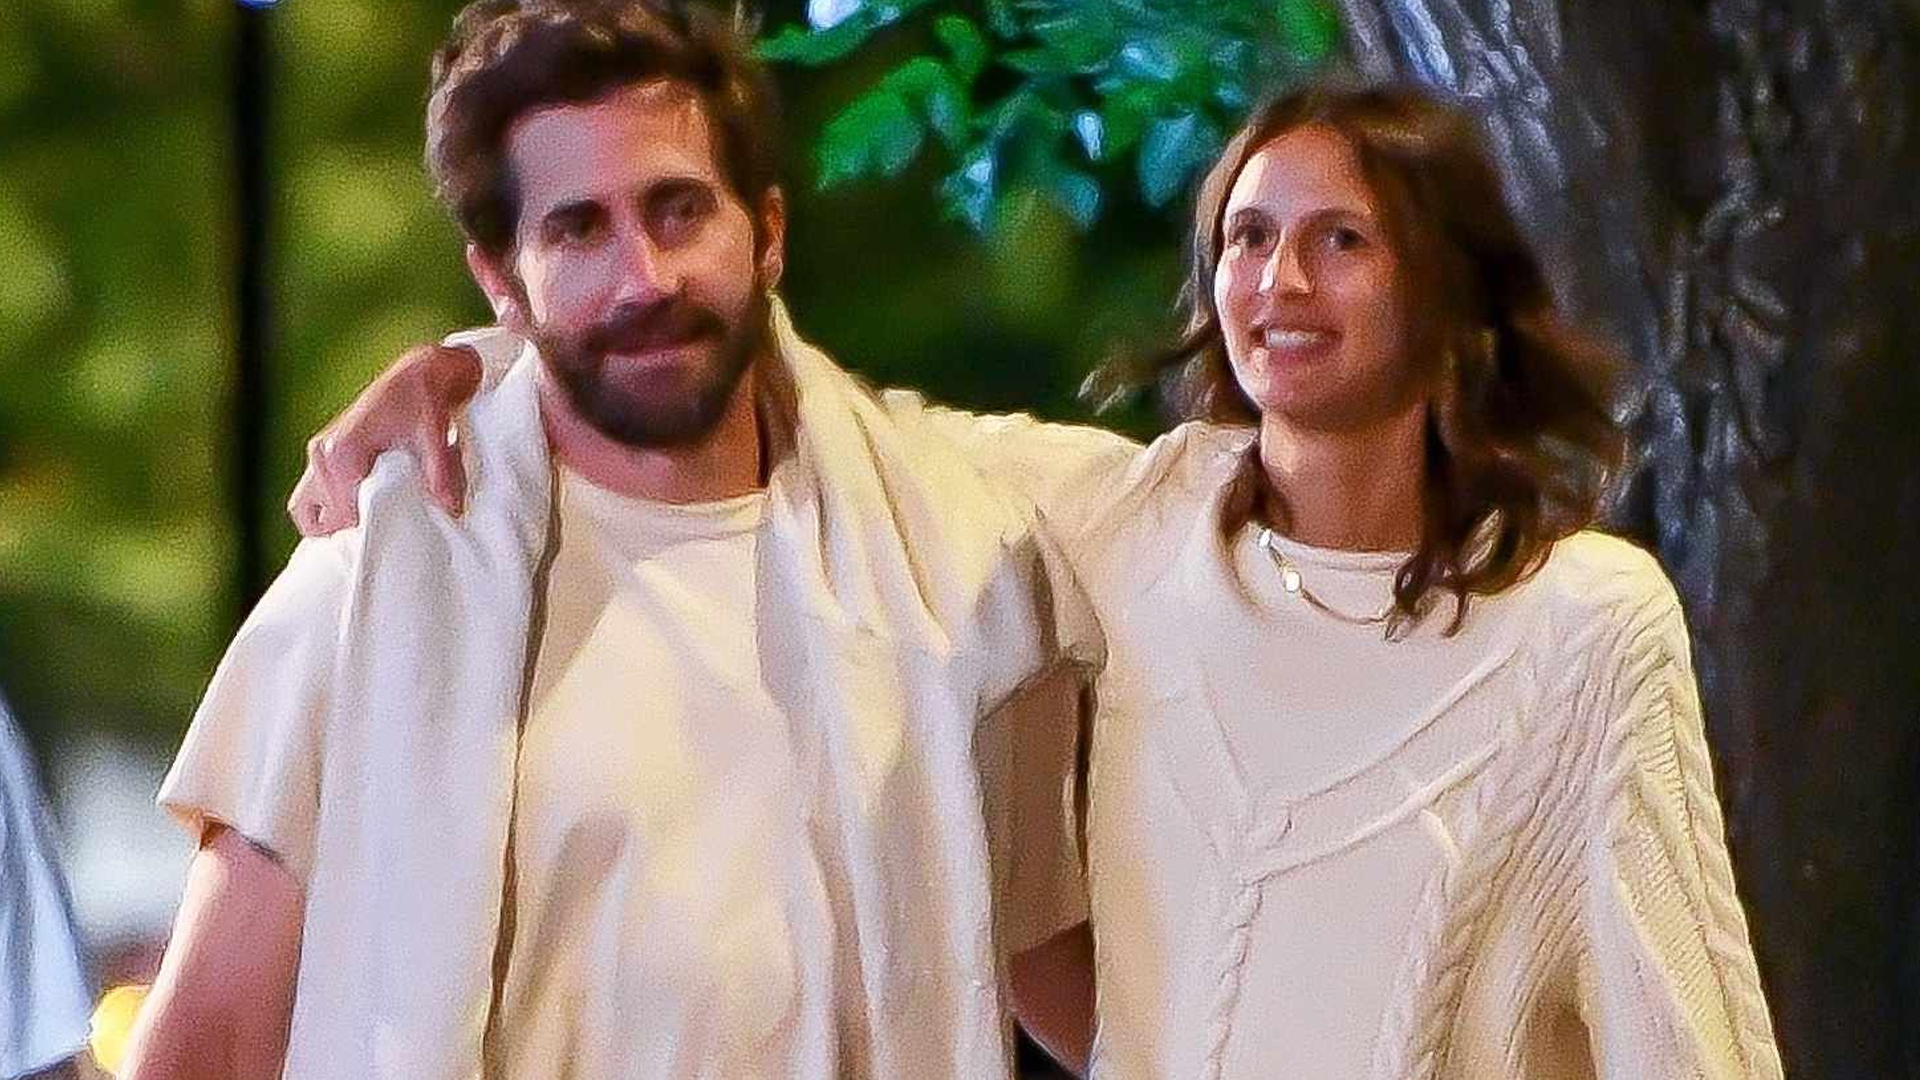 Jake Gyllenhall And his Girlfriend Jeanne Cadieu Spotted In SoHo!